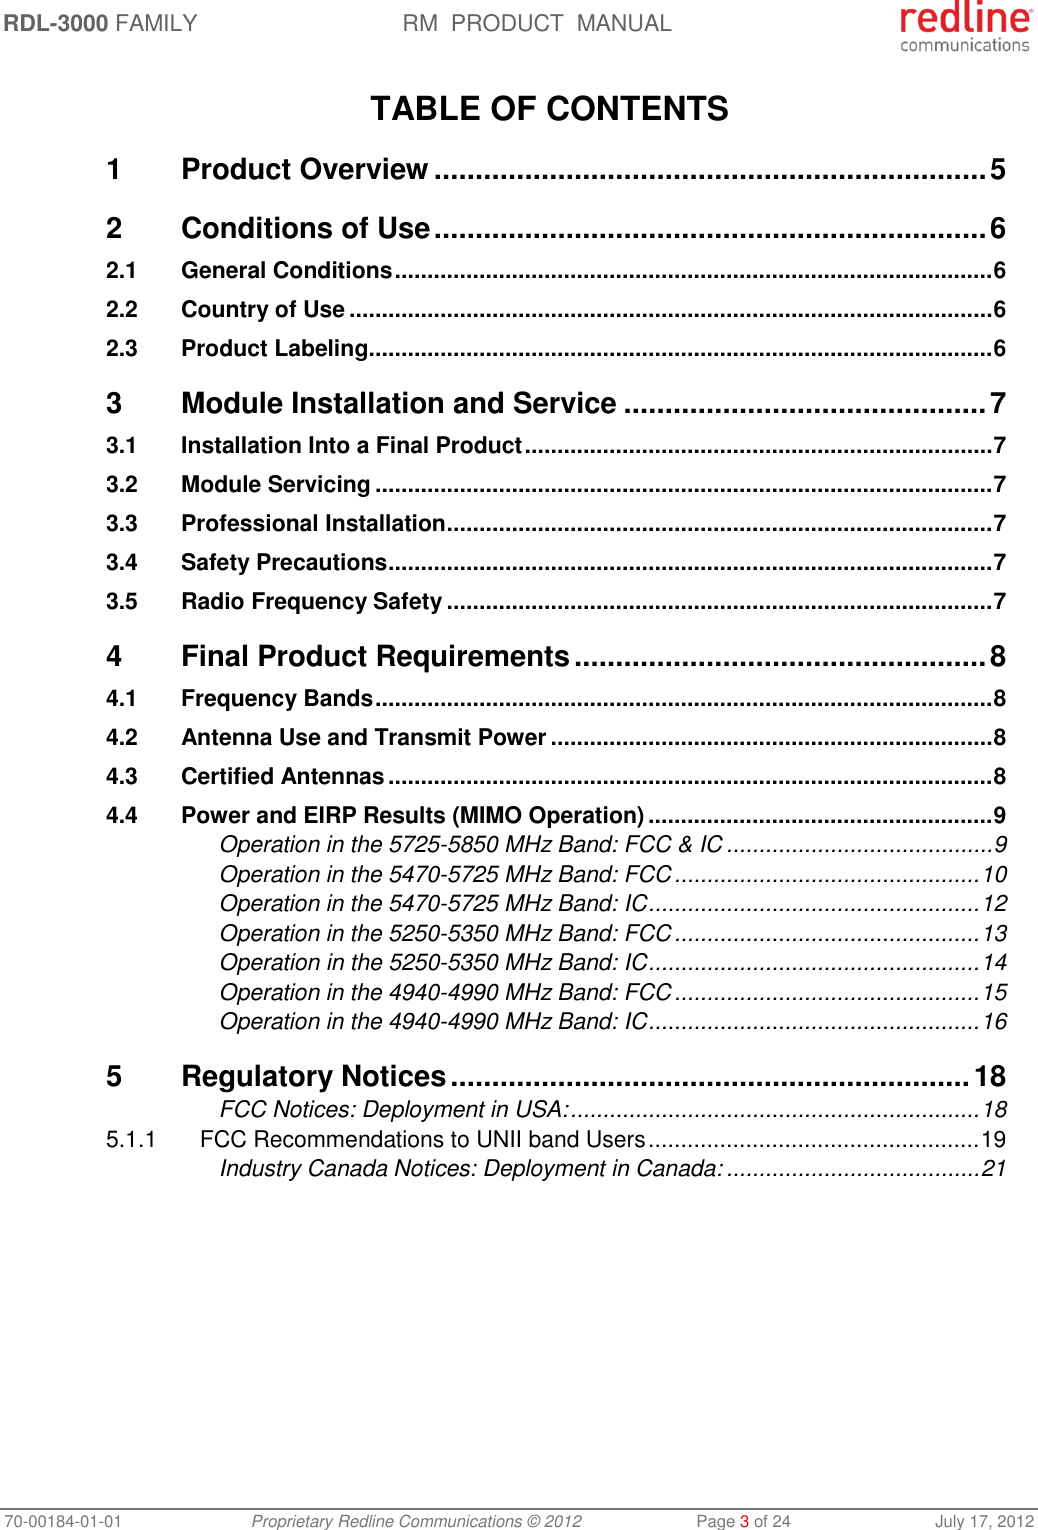 RDL-3000 FAMILY RM  PRODUCT  MANUAL 70-00184-01-01 Proprietary Redline Communications © 2012  Page 3 of 24  July 17, 2012  TABLE OF CONTENTS 1 Product Overview ................................................................... 5 2 Conditions of Use ................................................................... 6 2.1 General Conditions ............................................................................................ 6 2.2 Country of Use ................................................................................................... 6 2.3 Product Labeling ................................................................................................ 6 3 Module Installation and Service ............................................ 7 3.1 Installation Into a Final Product ........................................................................ 7 3.2 Module Servicing ............................................................................................... 7 3.3 Professional Installation .................................................................................... 7 3.4 Safety Precautions ............................................................................................. 7 3.5 Radio Frequency Safety .................................................................................... 7 4 Final Product Requirements .................................................. 8 4.1 Frequency Bands ............................................................................................... 8 4.2 Antenna Use and Transmit Power .................................................................... 8 4.3 Certified Antennas ............................................................................................. 8 4.4 Power and EIRP Results (MIMO Operation) ..................................................... 9 Operation in the 5725-5850 MHz Band: FCC &amp; IC ......................................... 9 Operation in the 5470-5725 MHz Band: FCC ............................................... 10 Operation in the 5470-5725 MHz Band: IC ................................................... 12 Operation in the 5250-5350 MHz Band: FCC ............................................... 13 Operation in the 5250-5350 MHz Band: IC ................................................... 14 Operation in the 4940-4990 MHz Band: FCC ............................................... 15 Operation in the 4940-4990 MHz Band: IC ................................................... 16 5 Regulatory Notices ............................................................... 18 FCC Notices: Deployment in USA: ............................................................... 18 5.1.1 FCC Recommendations to UNII band Users ................................................... 19 Industry Canada Notices: Deployment in Canada: ....................................... 21  